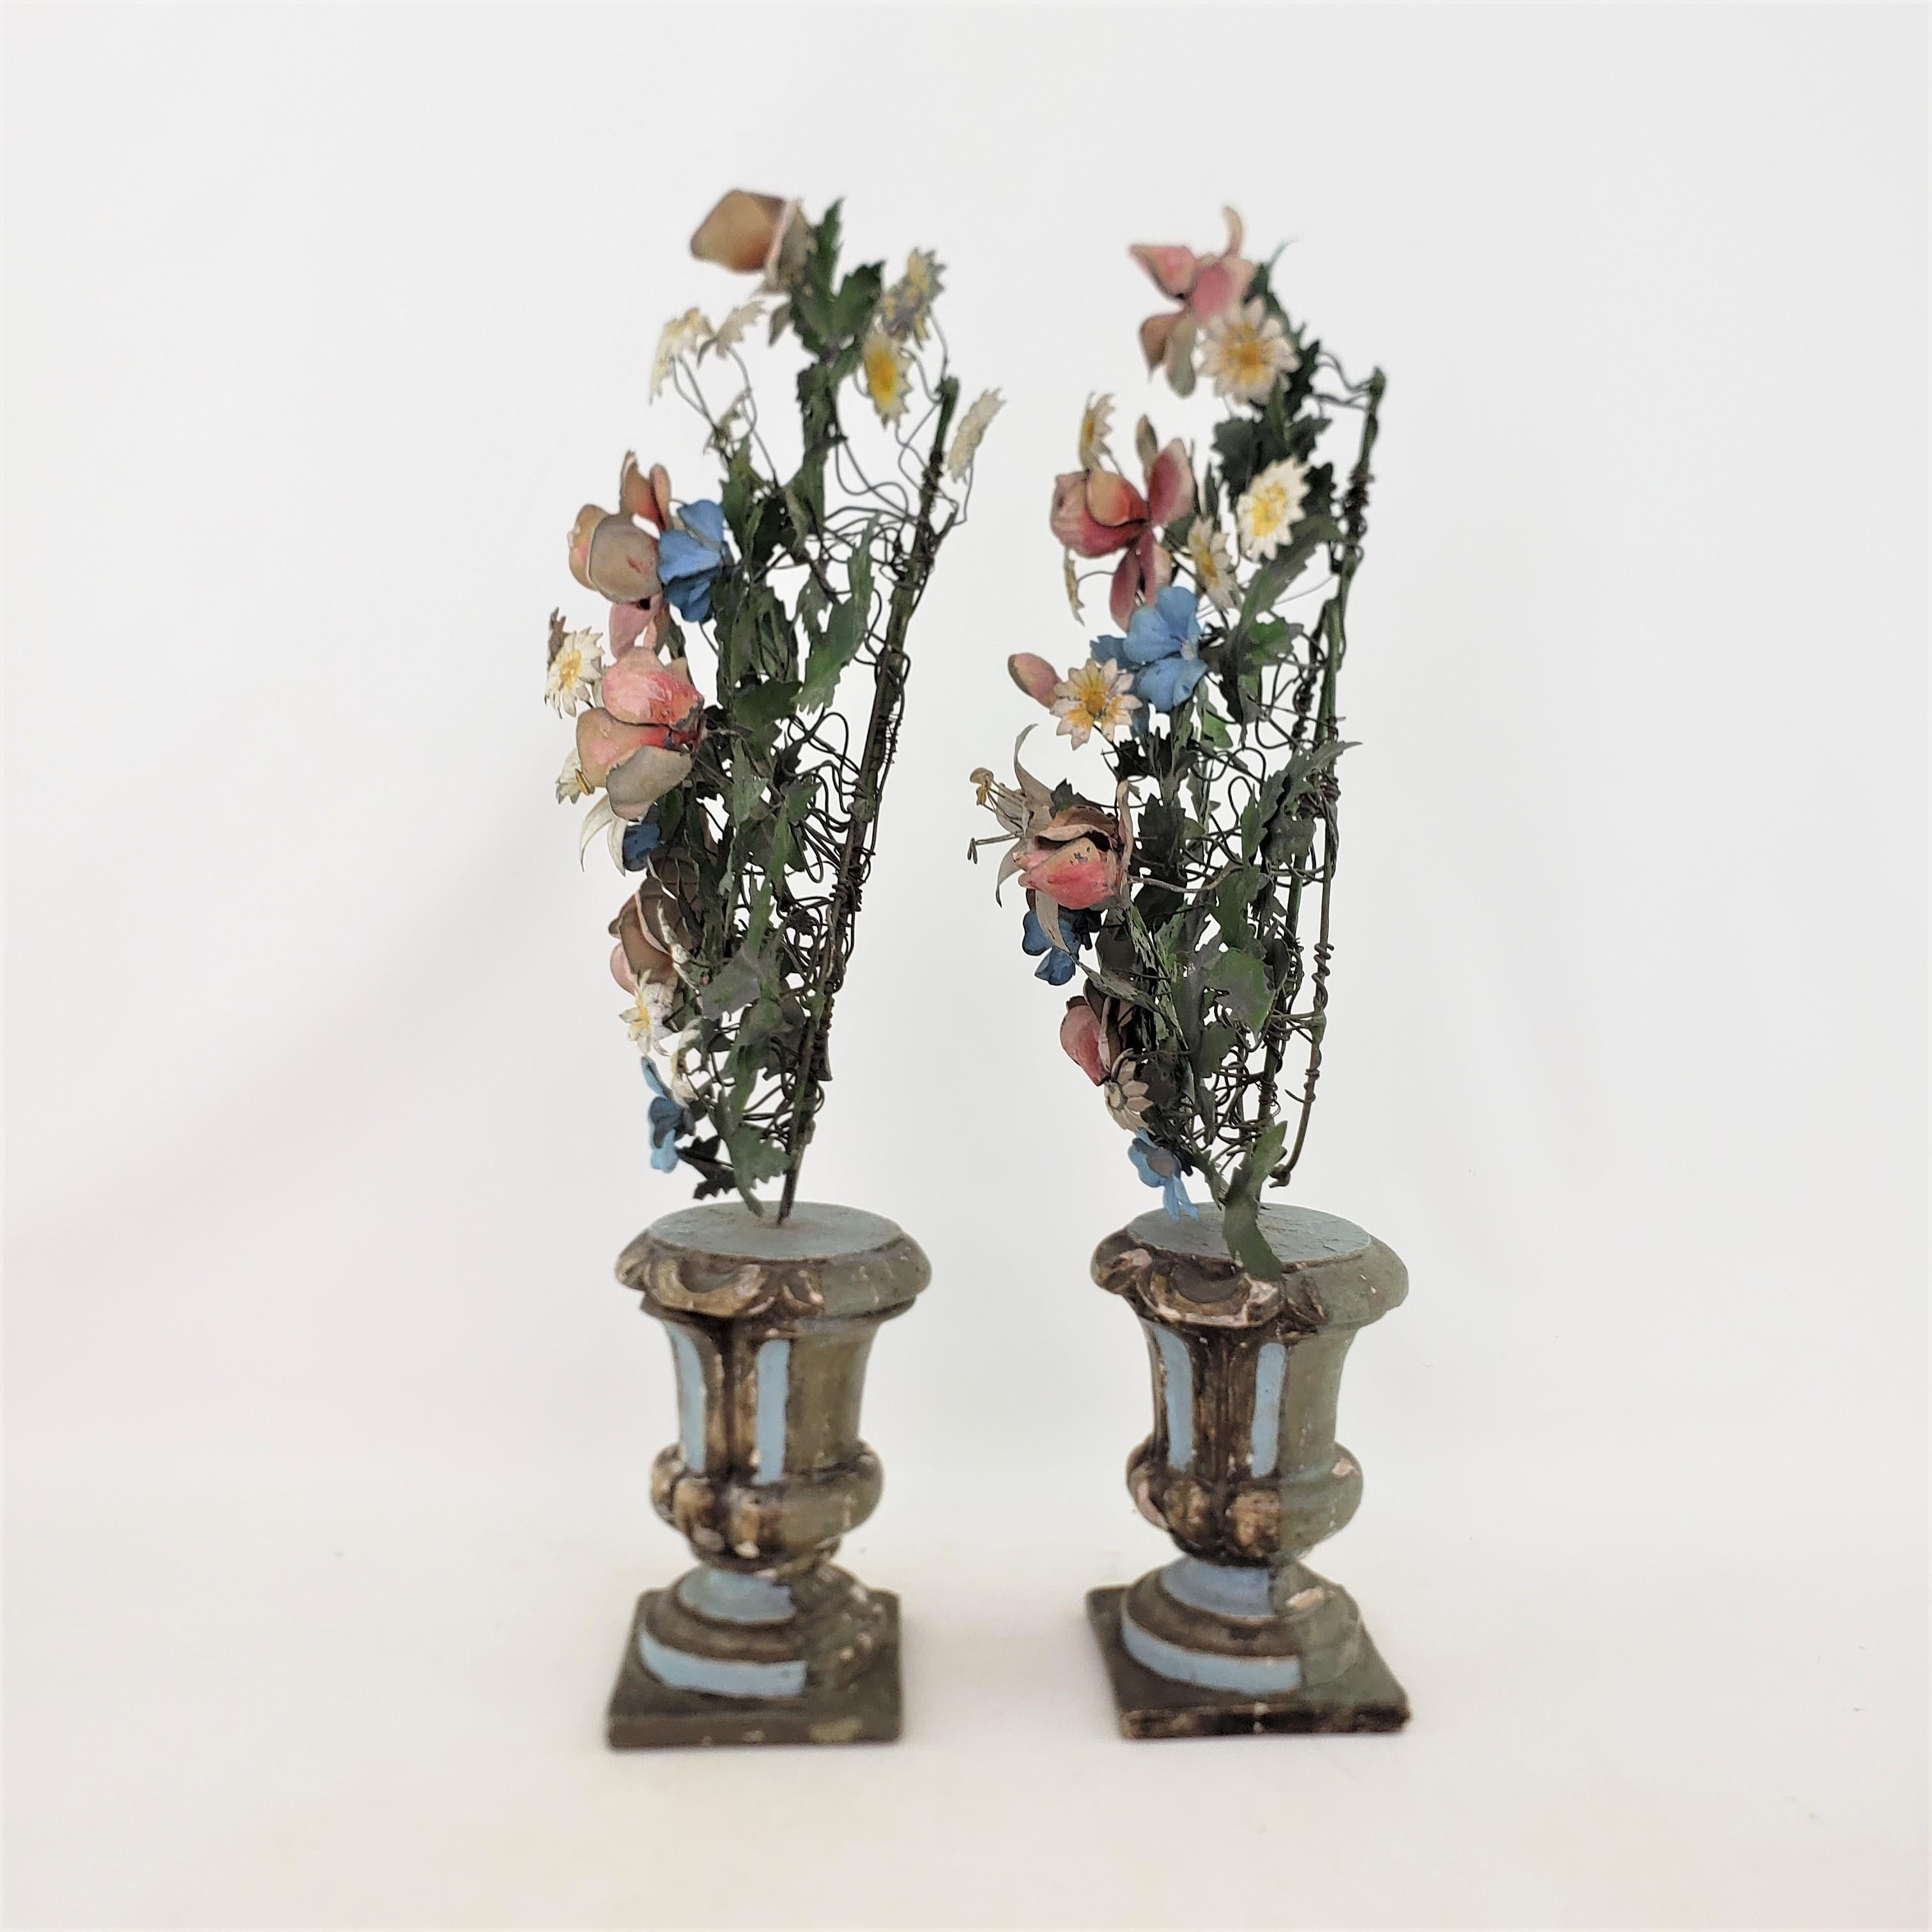 19th Century Pair of Antique French Sculptural Toleware Potted Floral Bouquets or Garnitures For Sale